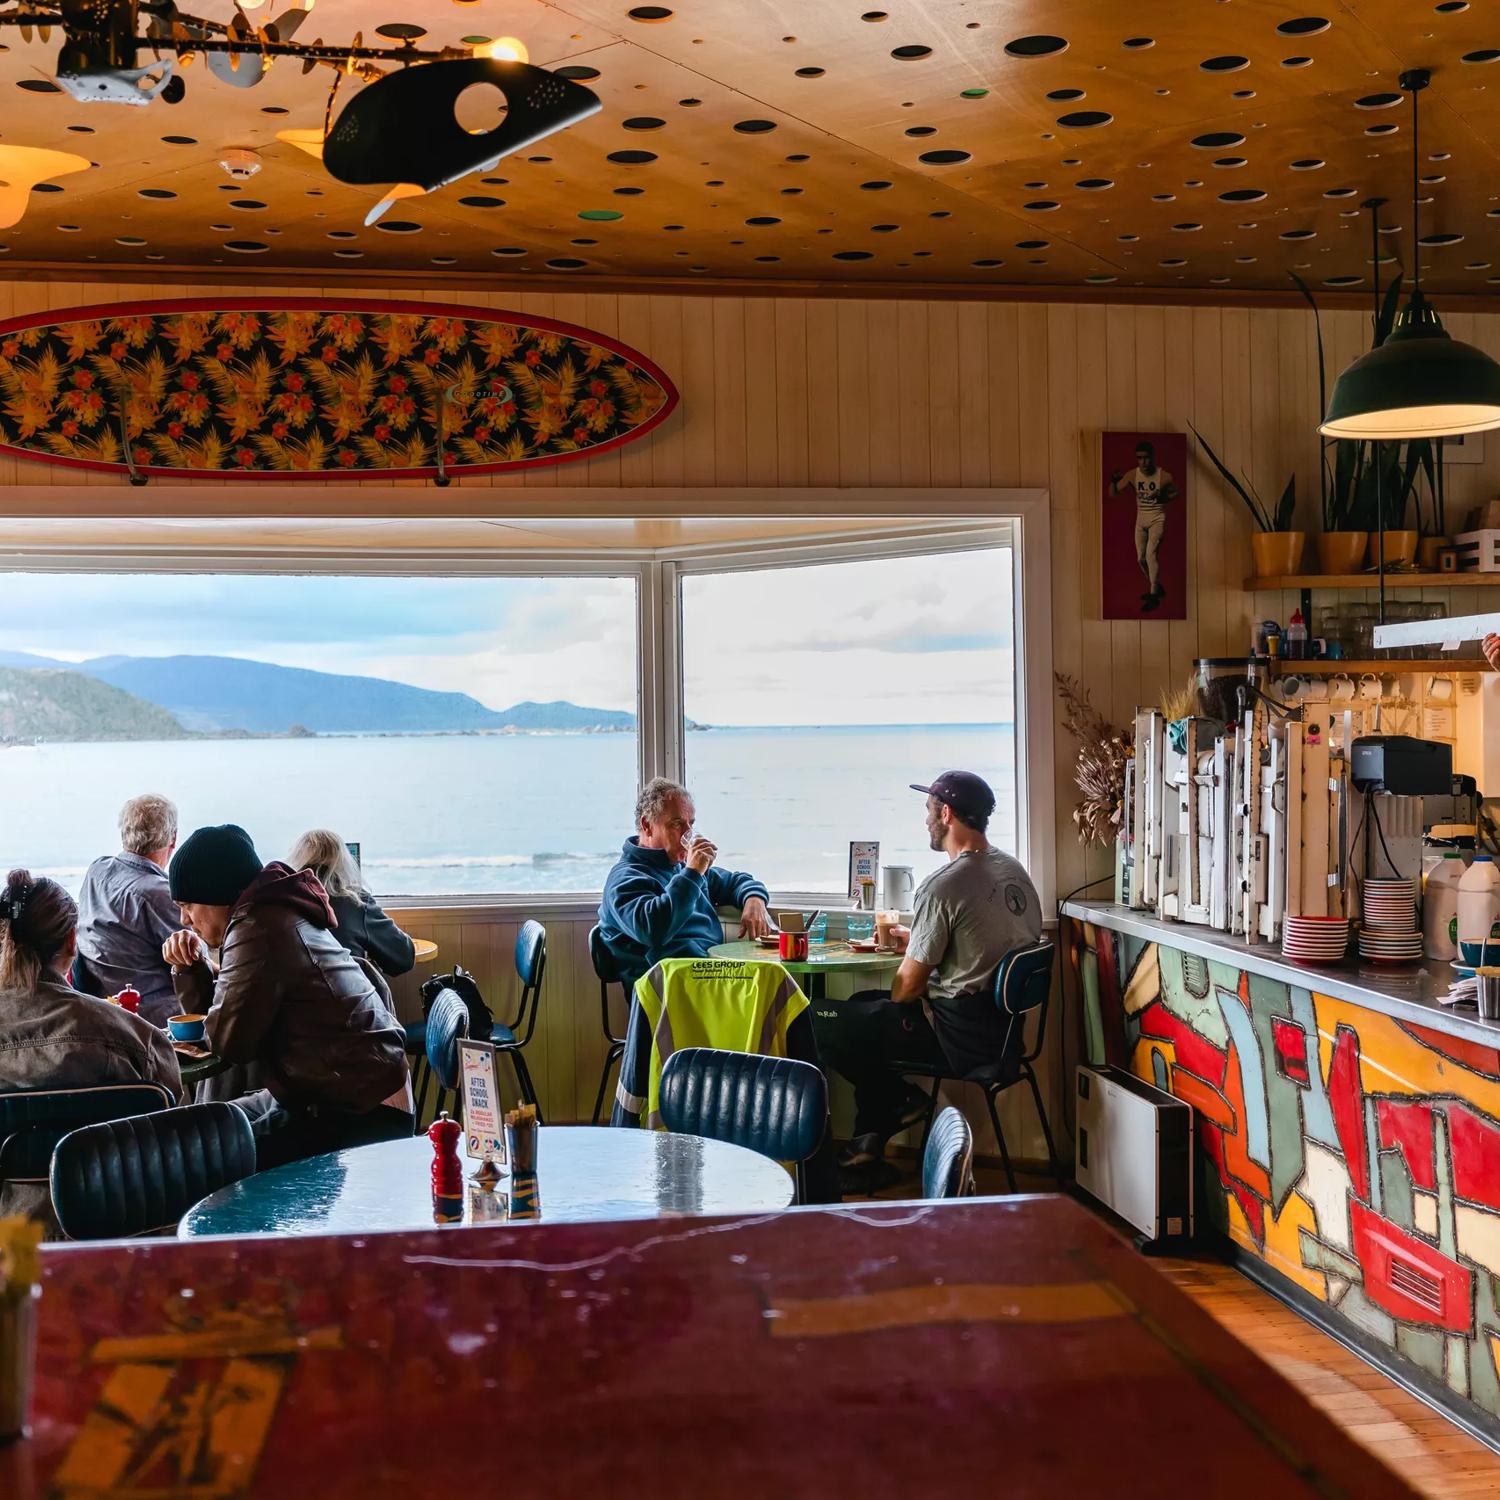 Diners sit in Maranui Cafe, overlooking Lyall Bay and Pencarrow. A barista behind the counter makes coffee.